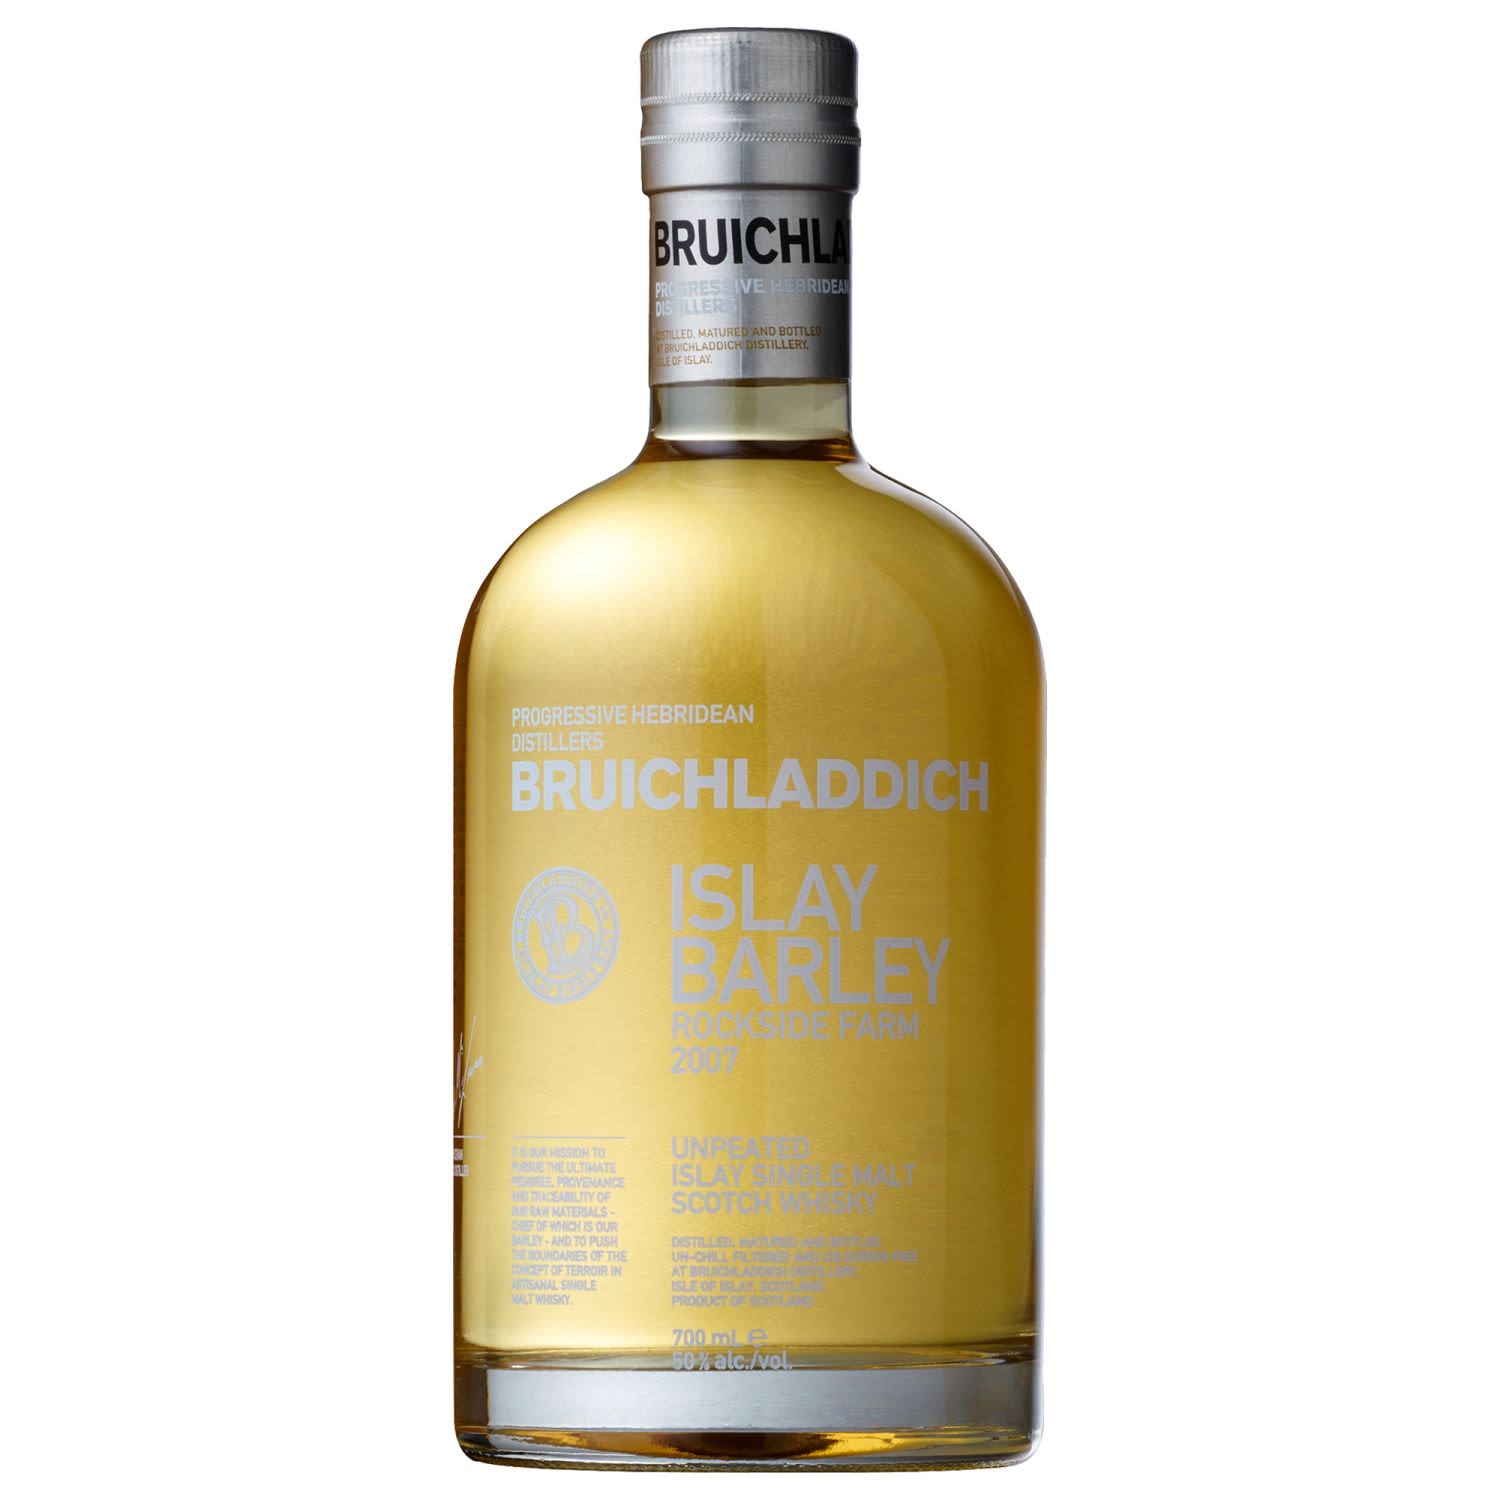 Bruichladdich's Islay Barley is the ultimate expression of provenance: single malt, single barley variety, single harvest and even a single field! Islay Barley is unpeated for maximum barley flavour, non-chill filtered and colouring free. The Whisky is matured in American oak casks that are located in Bruichladdich's coldest warehouse. This is a fascinating exploration of the +terroir+ of single malt Whisky.<br /> <br />Alcohol Volume: 50.00%<br /><br />Pack Format: Bottle<br /><br />Standard Drinks: 27.6</br /><br />Pack Type: Bottle<br /><br />Country of Origin: Scotland<br />